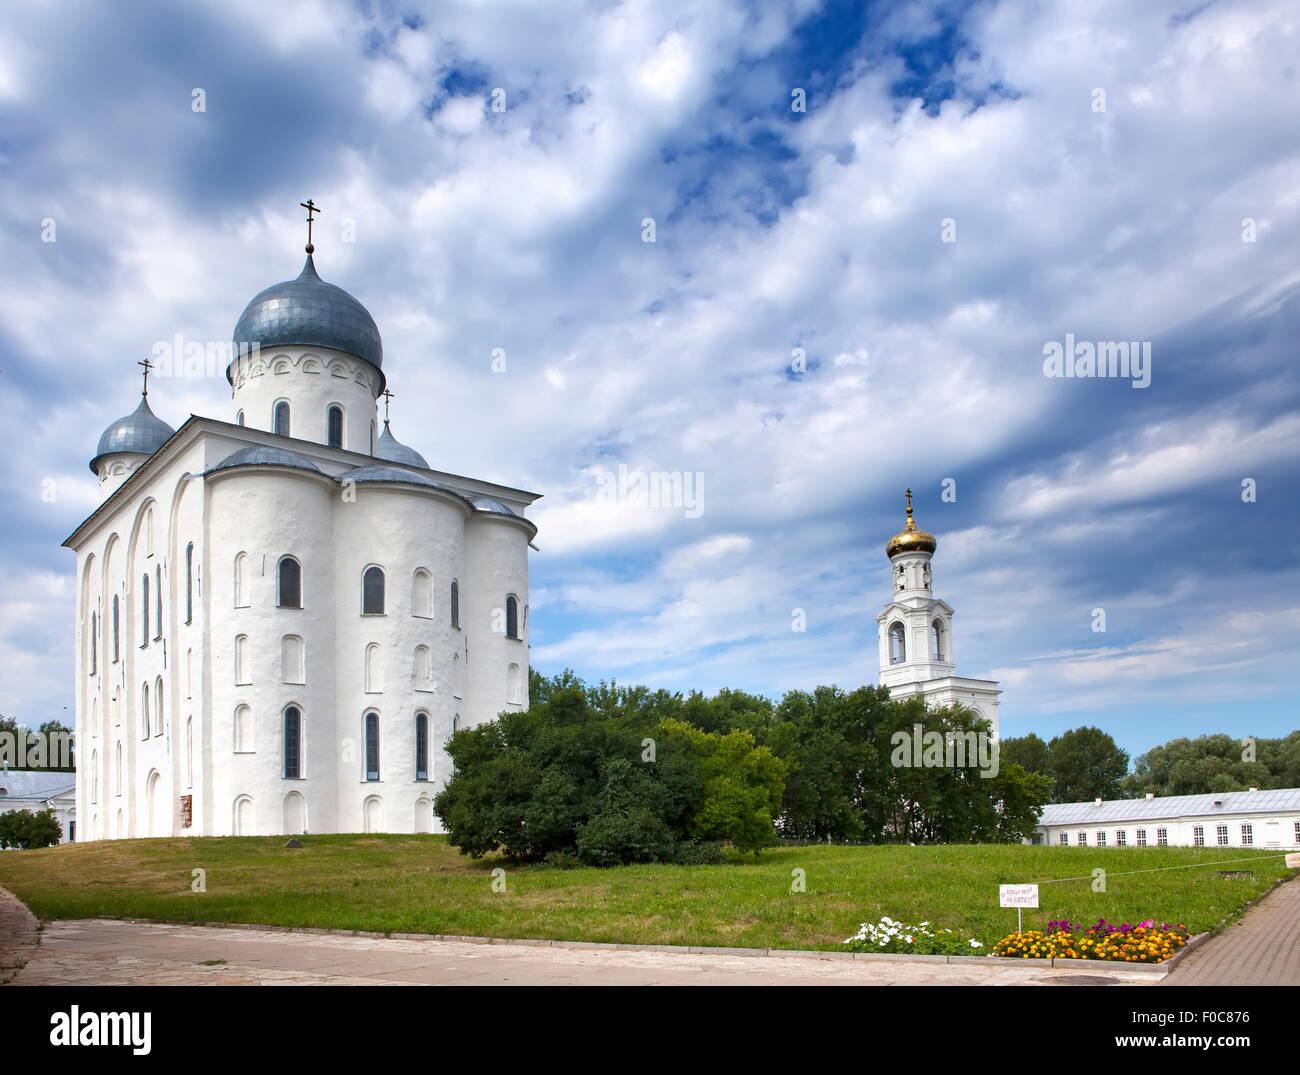 Sankt-Georgs Kathedrale, Russisches orthodoxes Kloster Yuriev in Groß Nowgorod (Weliki Nowgorod). Russland Stockfoto